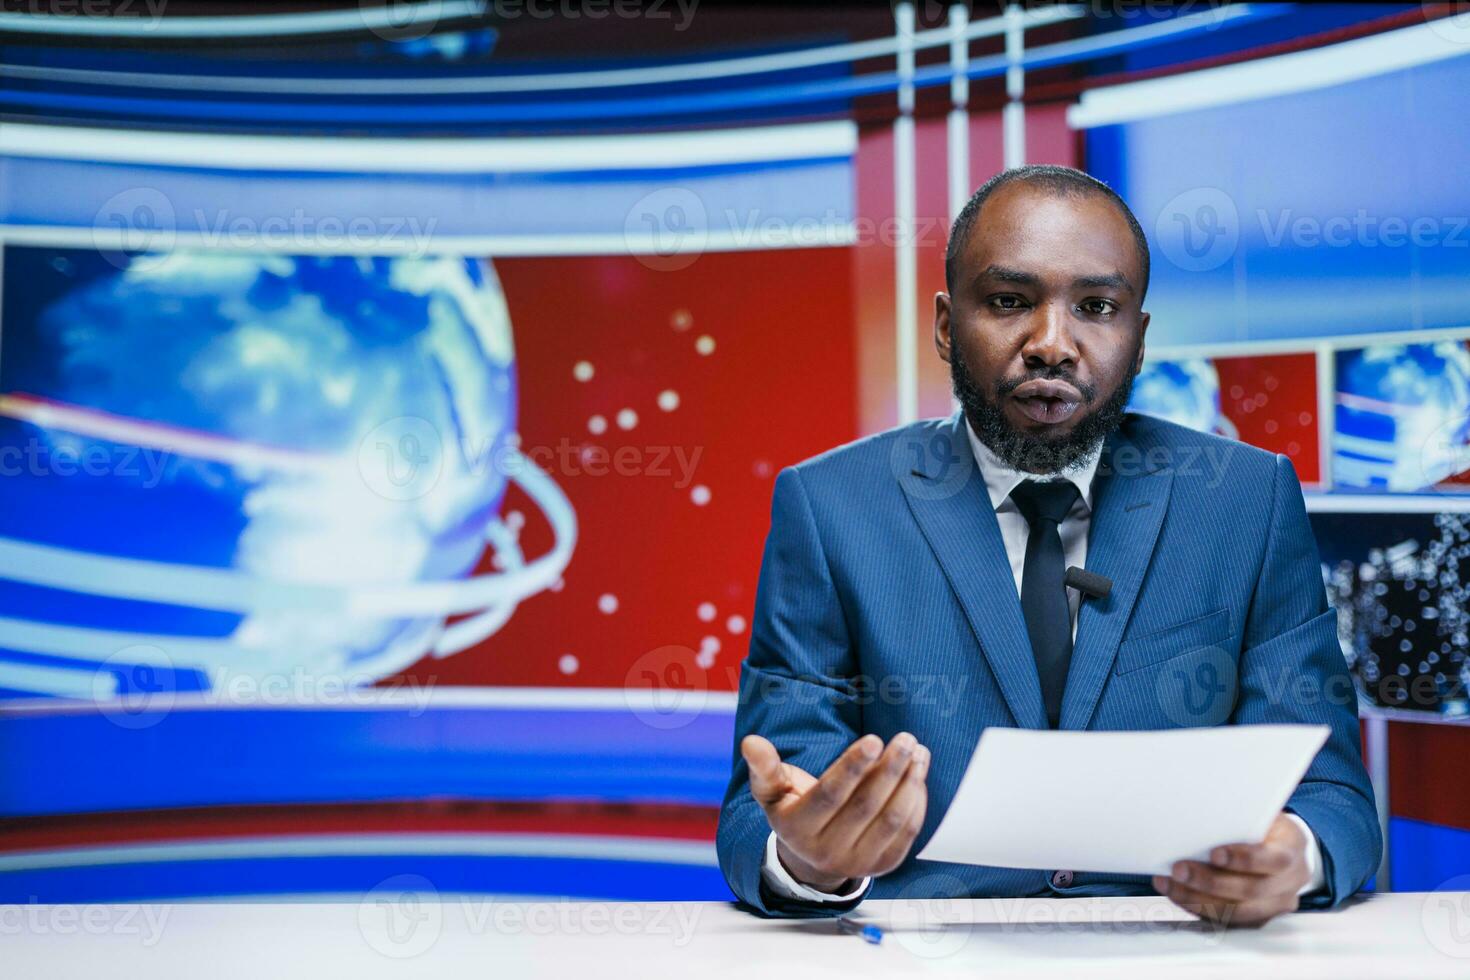 News reporter delivering breaking news on media segment in newsroom, reading important headlines of the day on international tv program. Man journalist presenting daily events live. photo